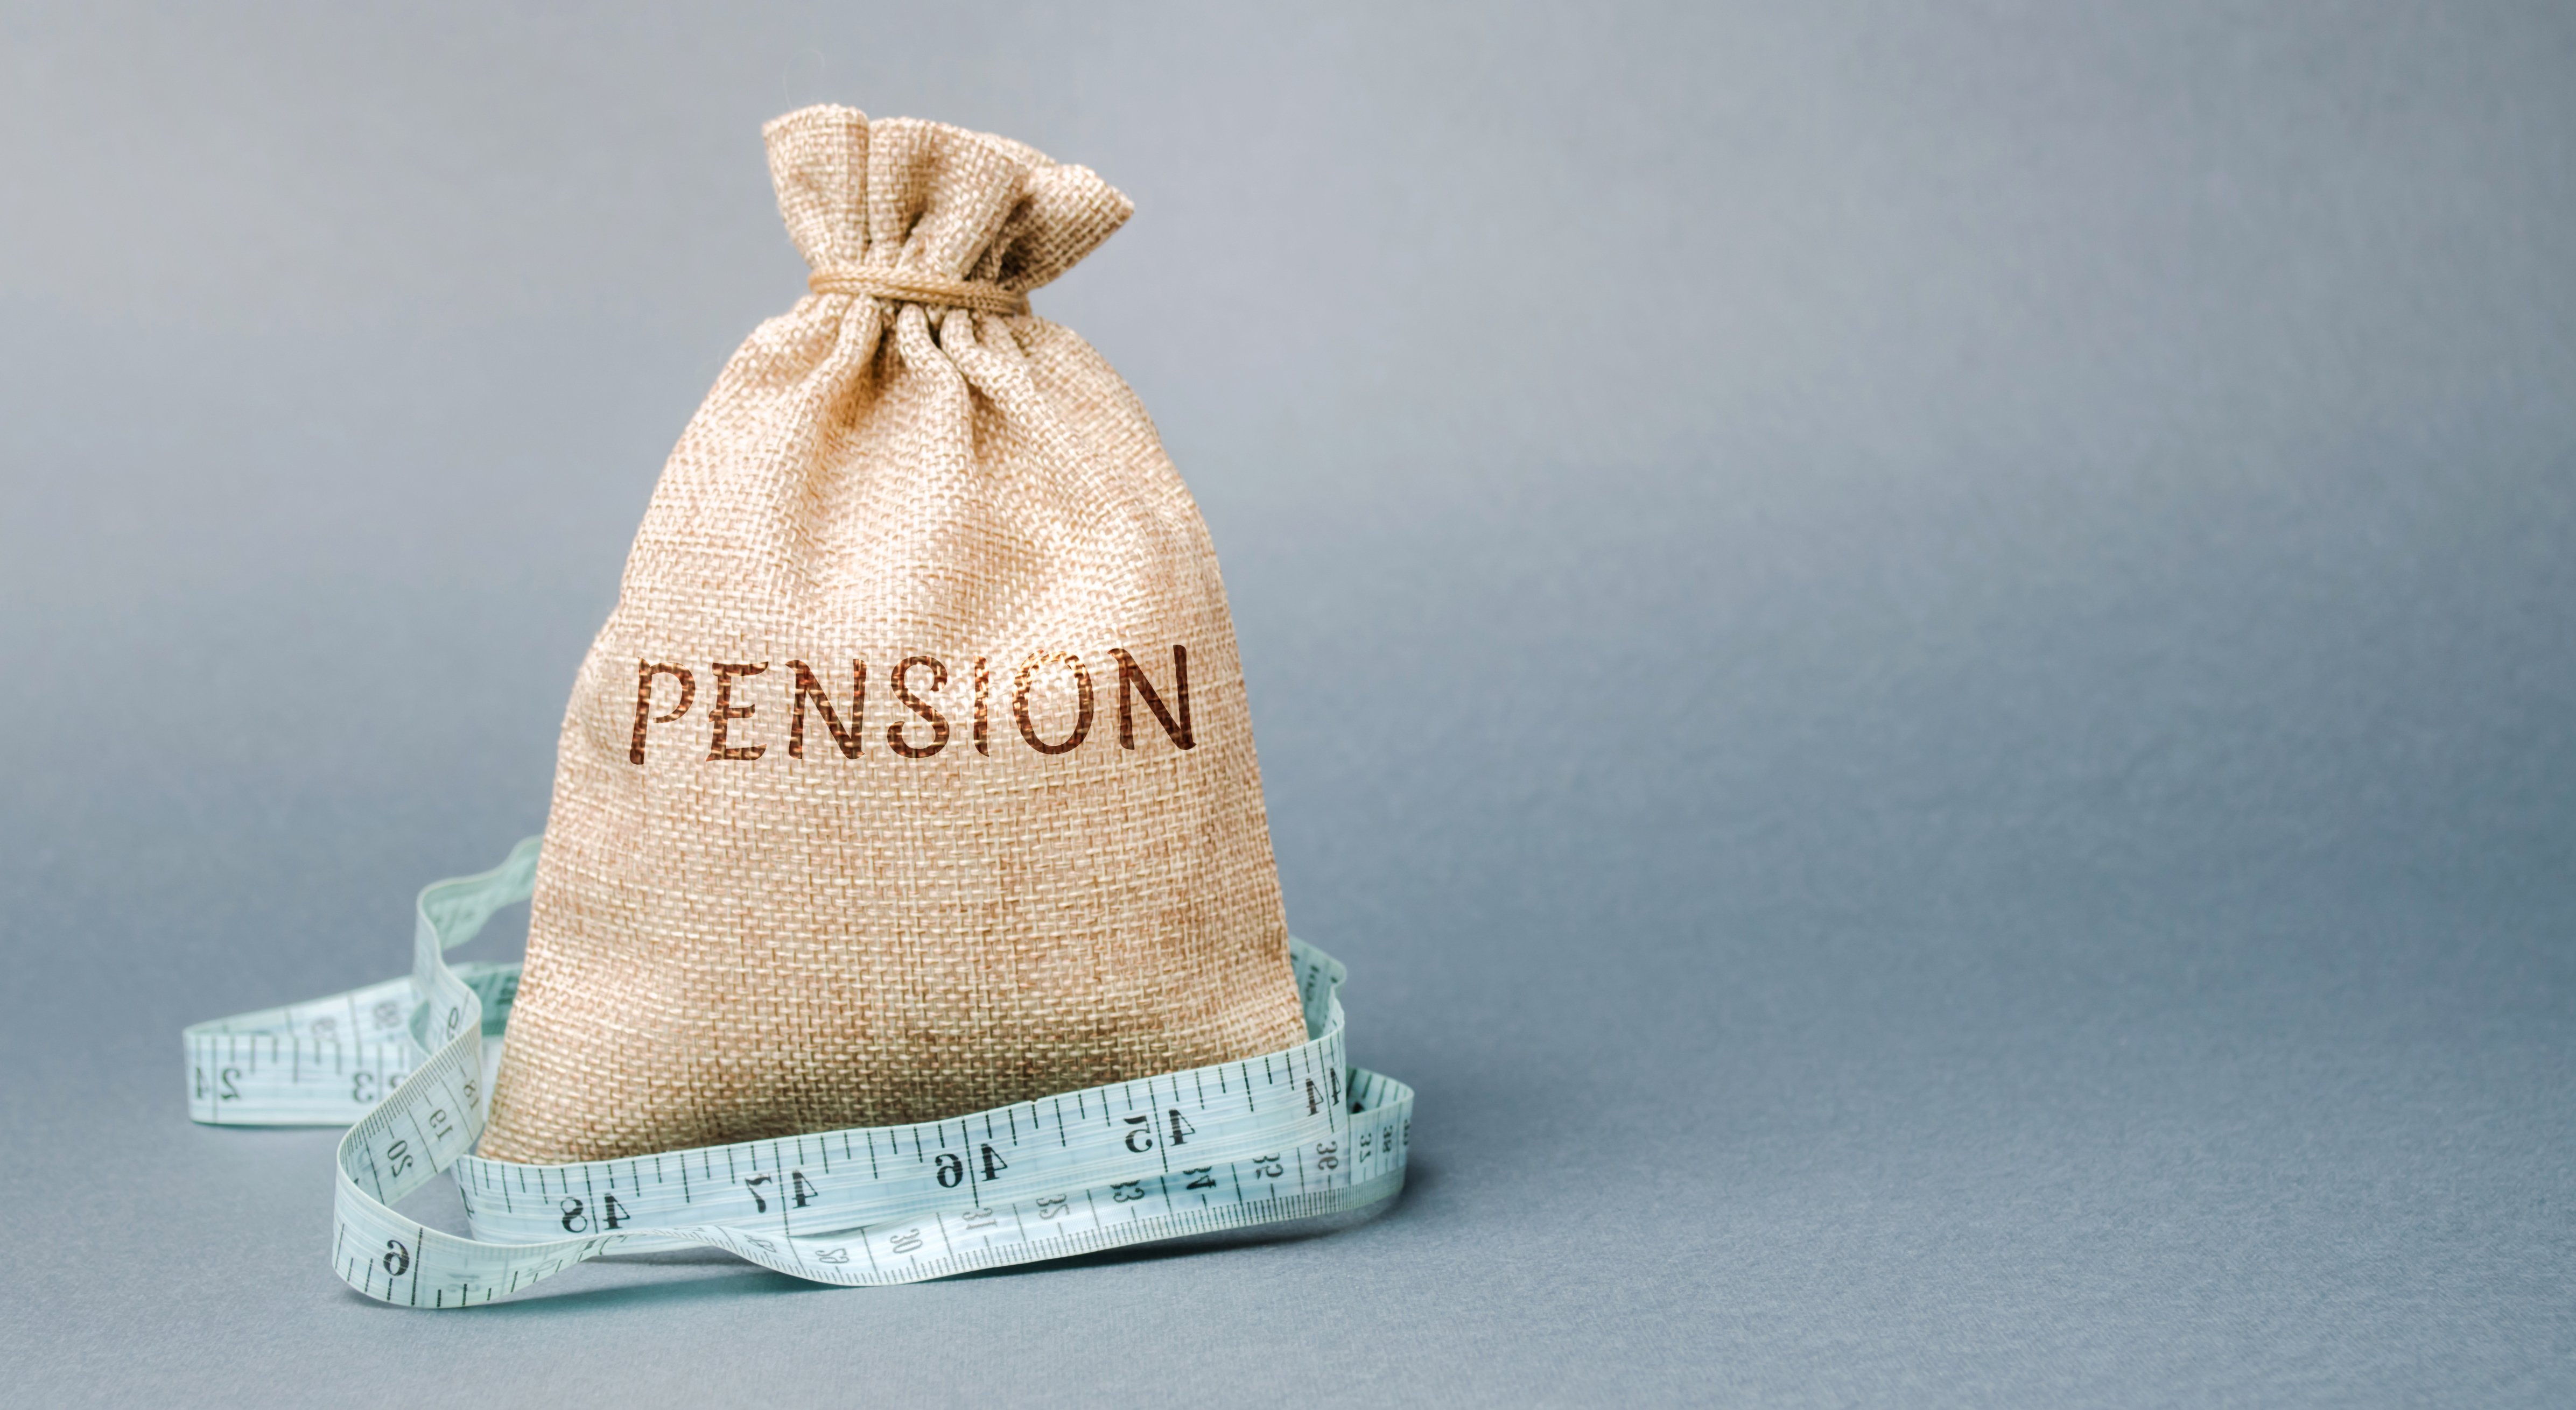 image shows a money bag with 'pension' written on it